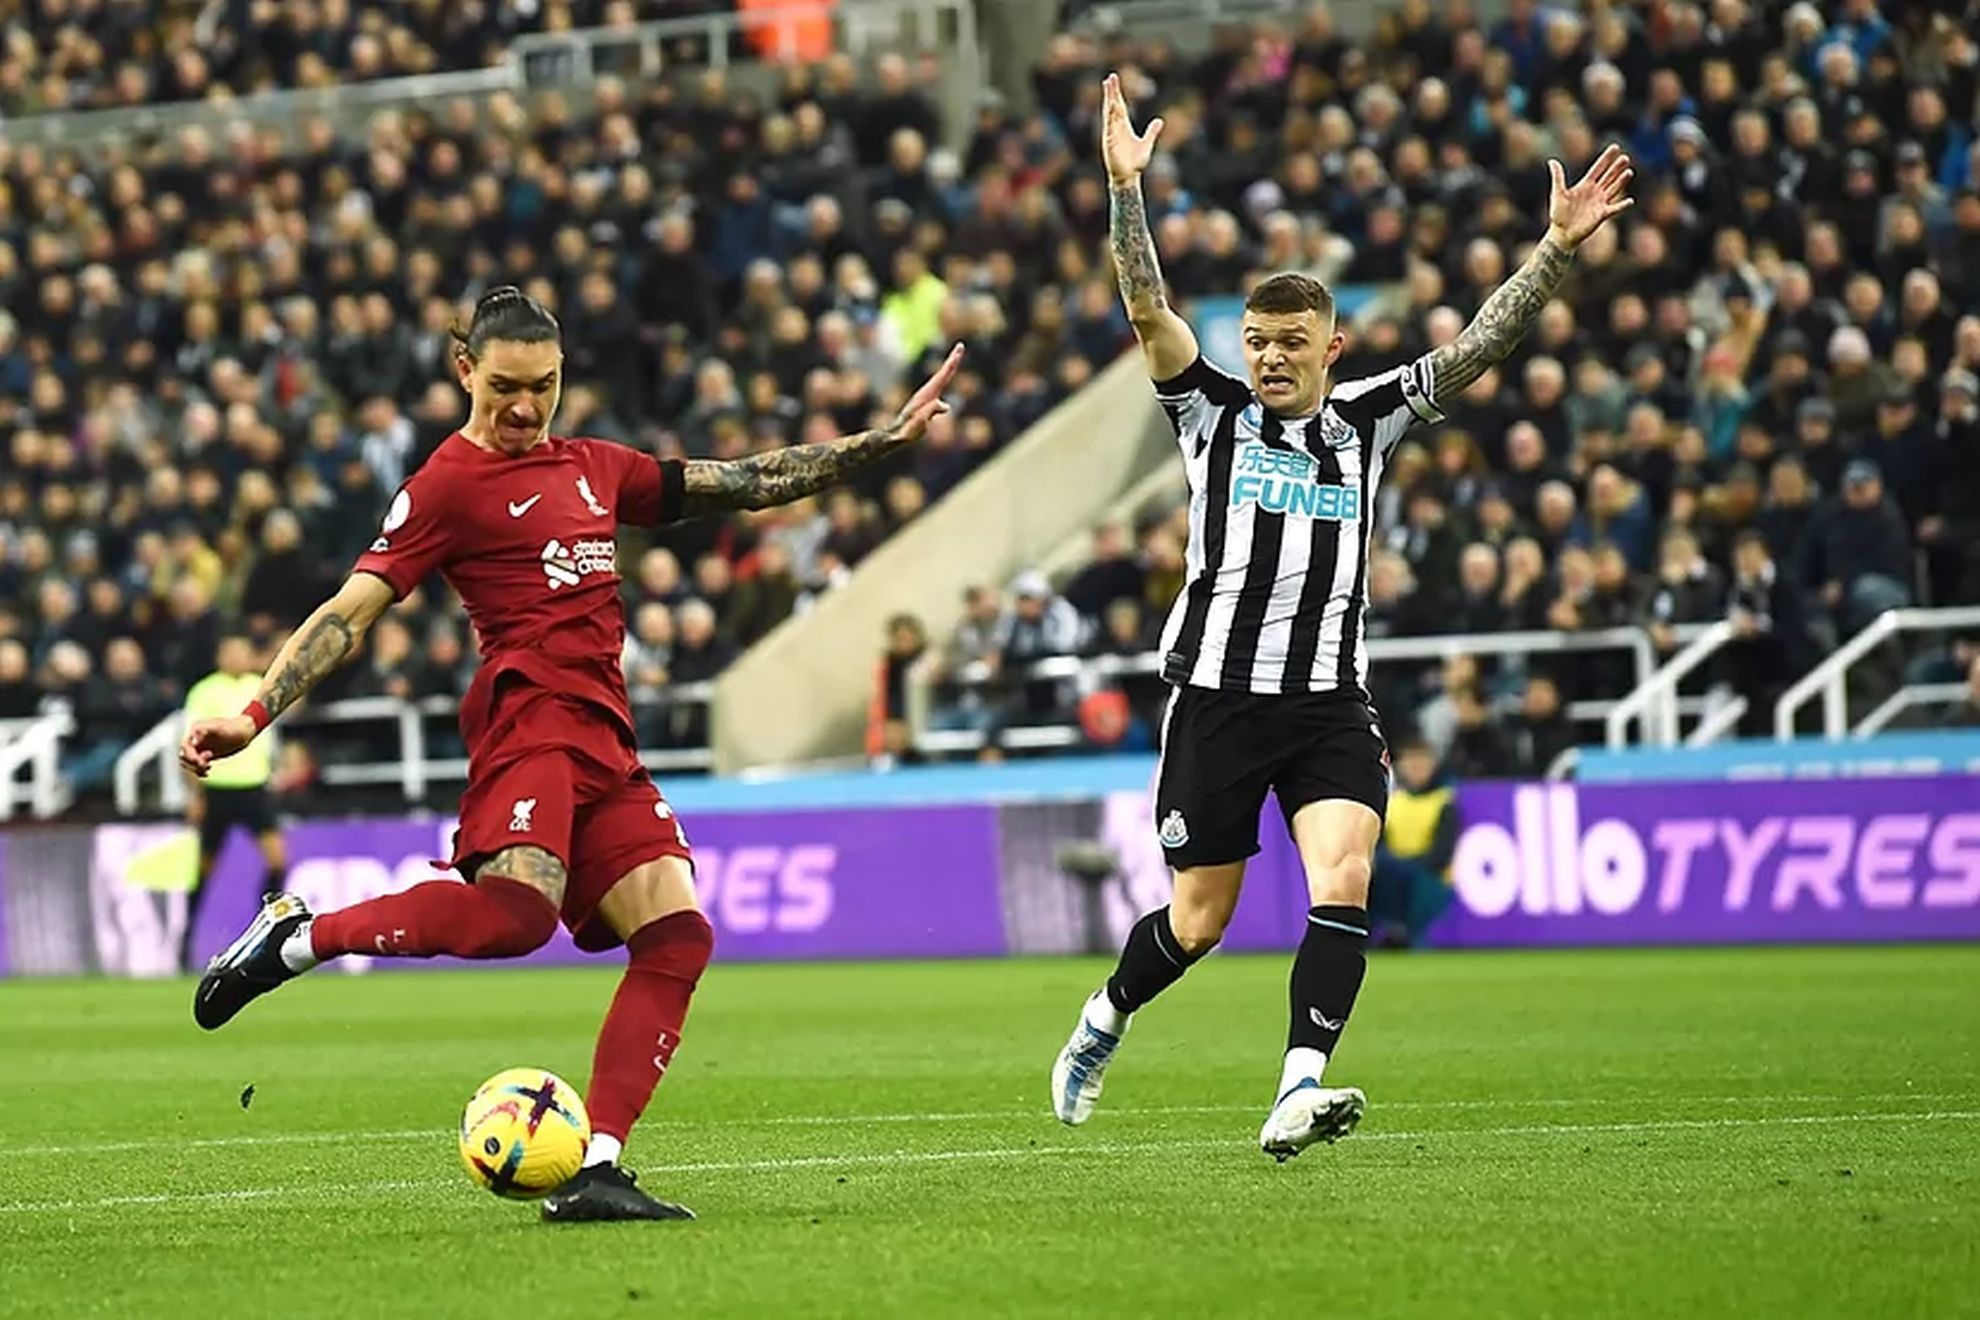 Liverpool warm up for Real Madrid with impressive win at Newcastle